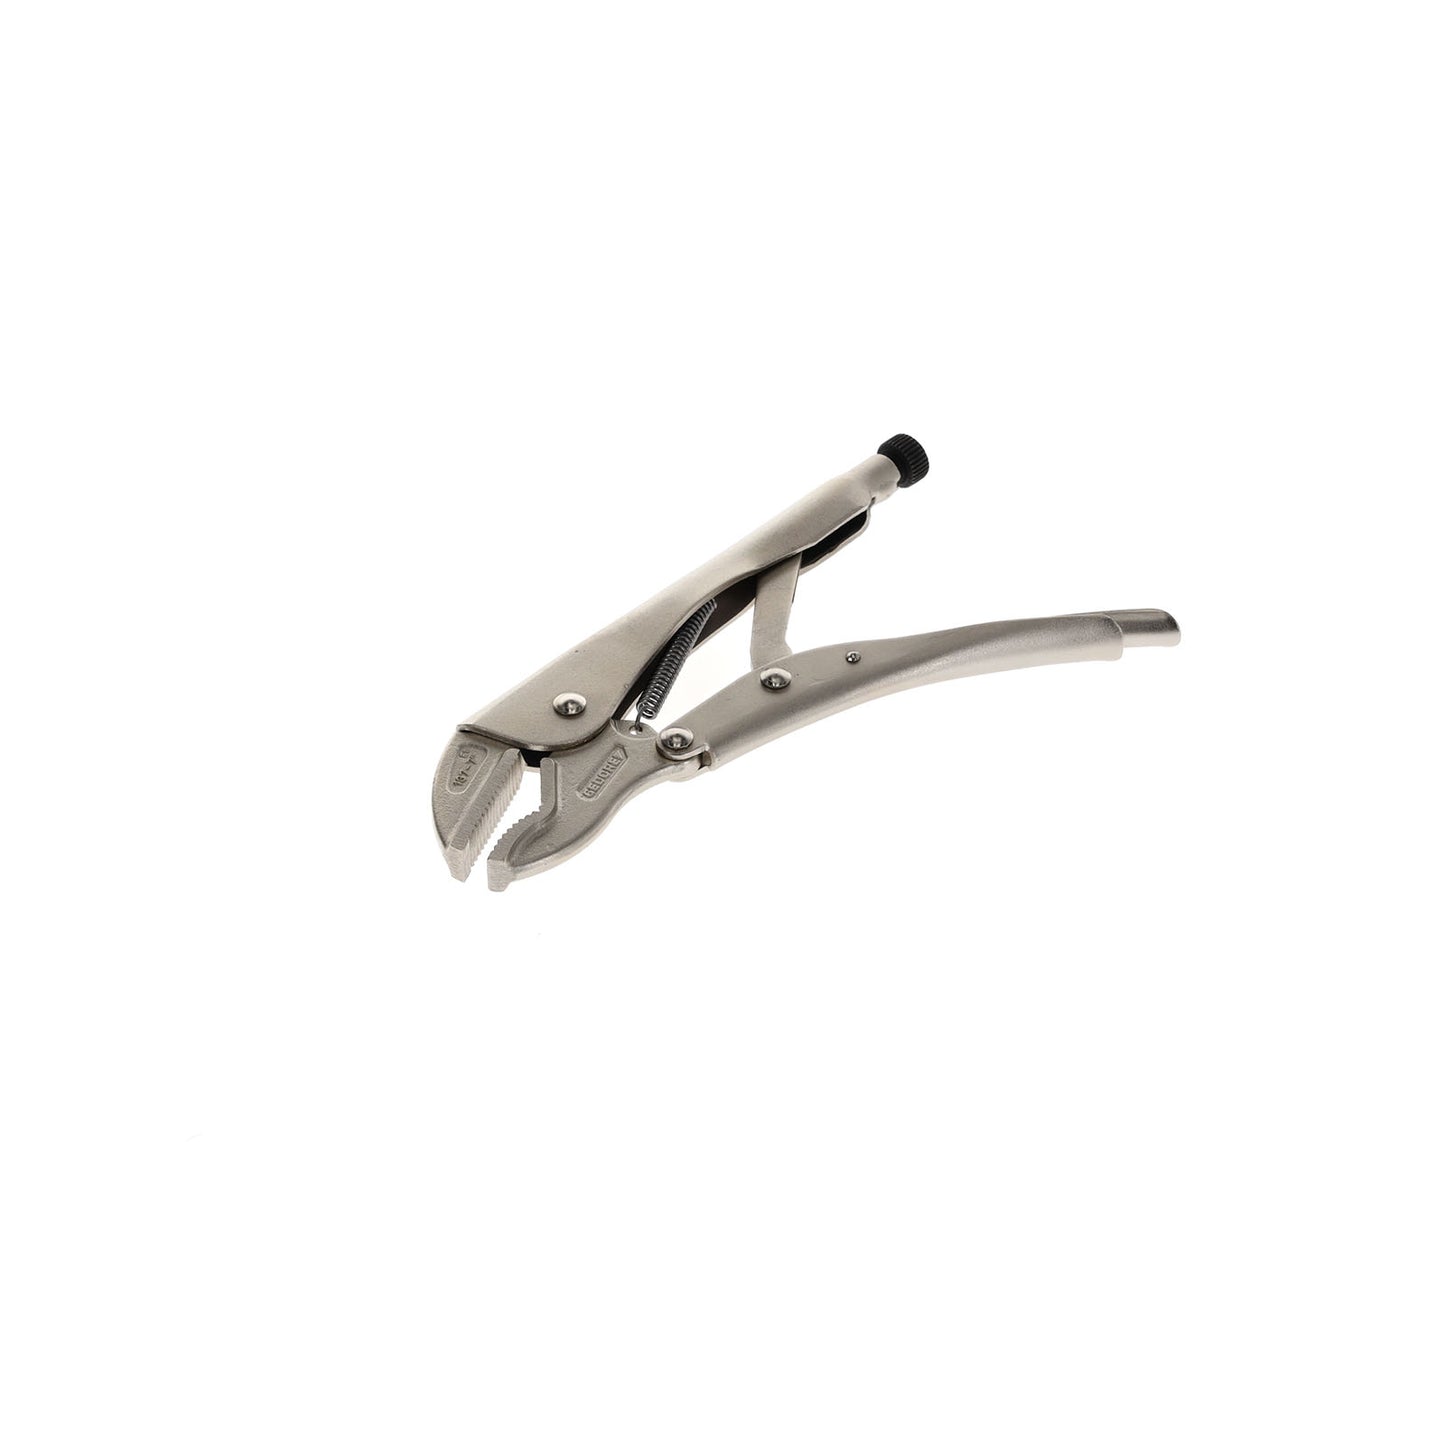 GEDORE 137 7 - Grip Clamp 7" (6406620)